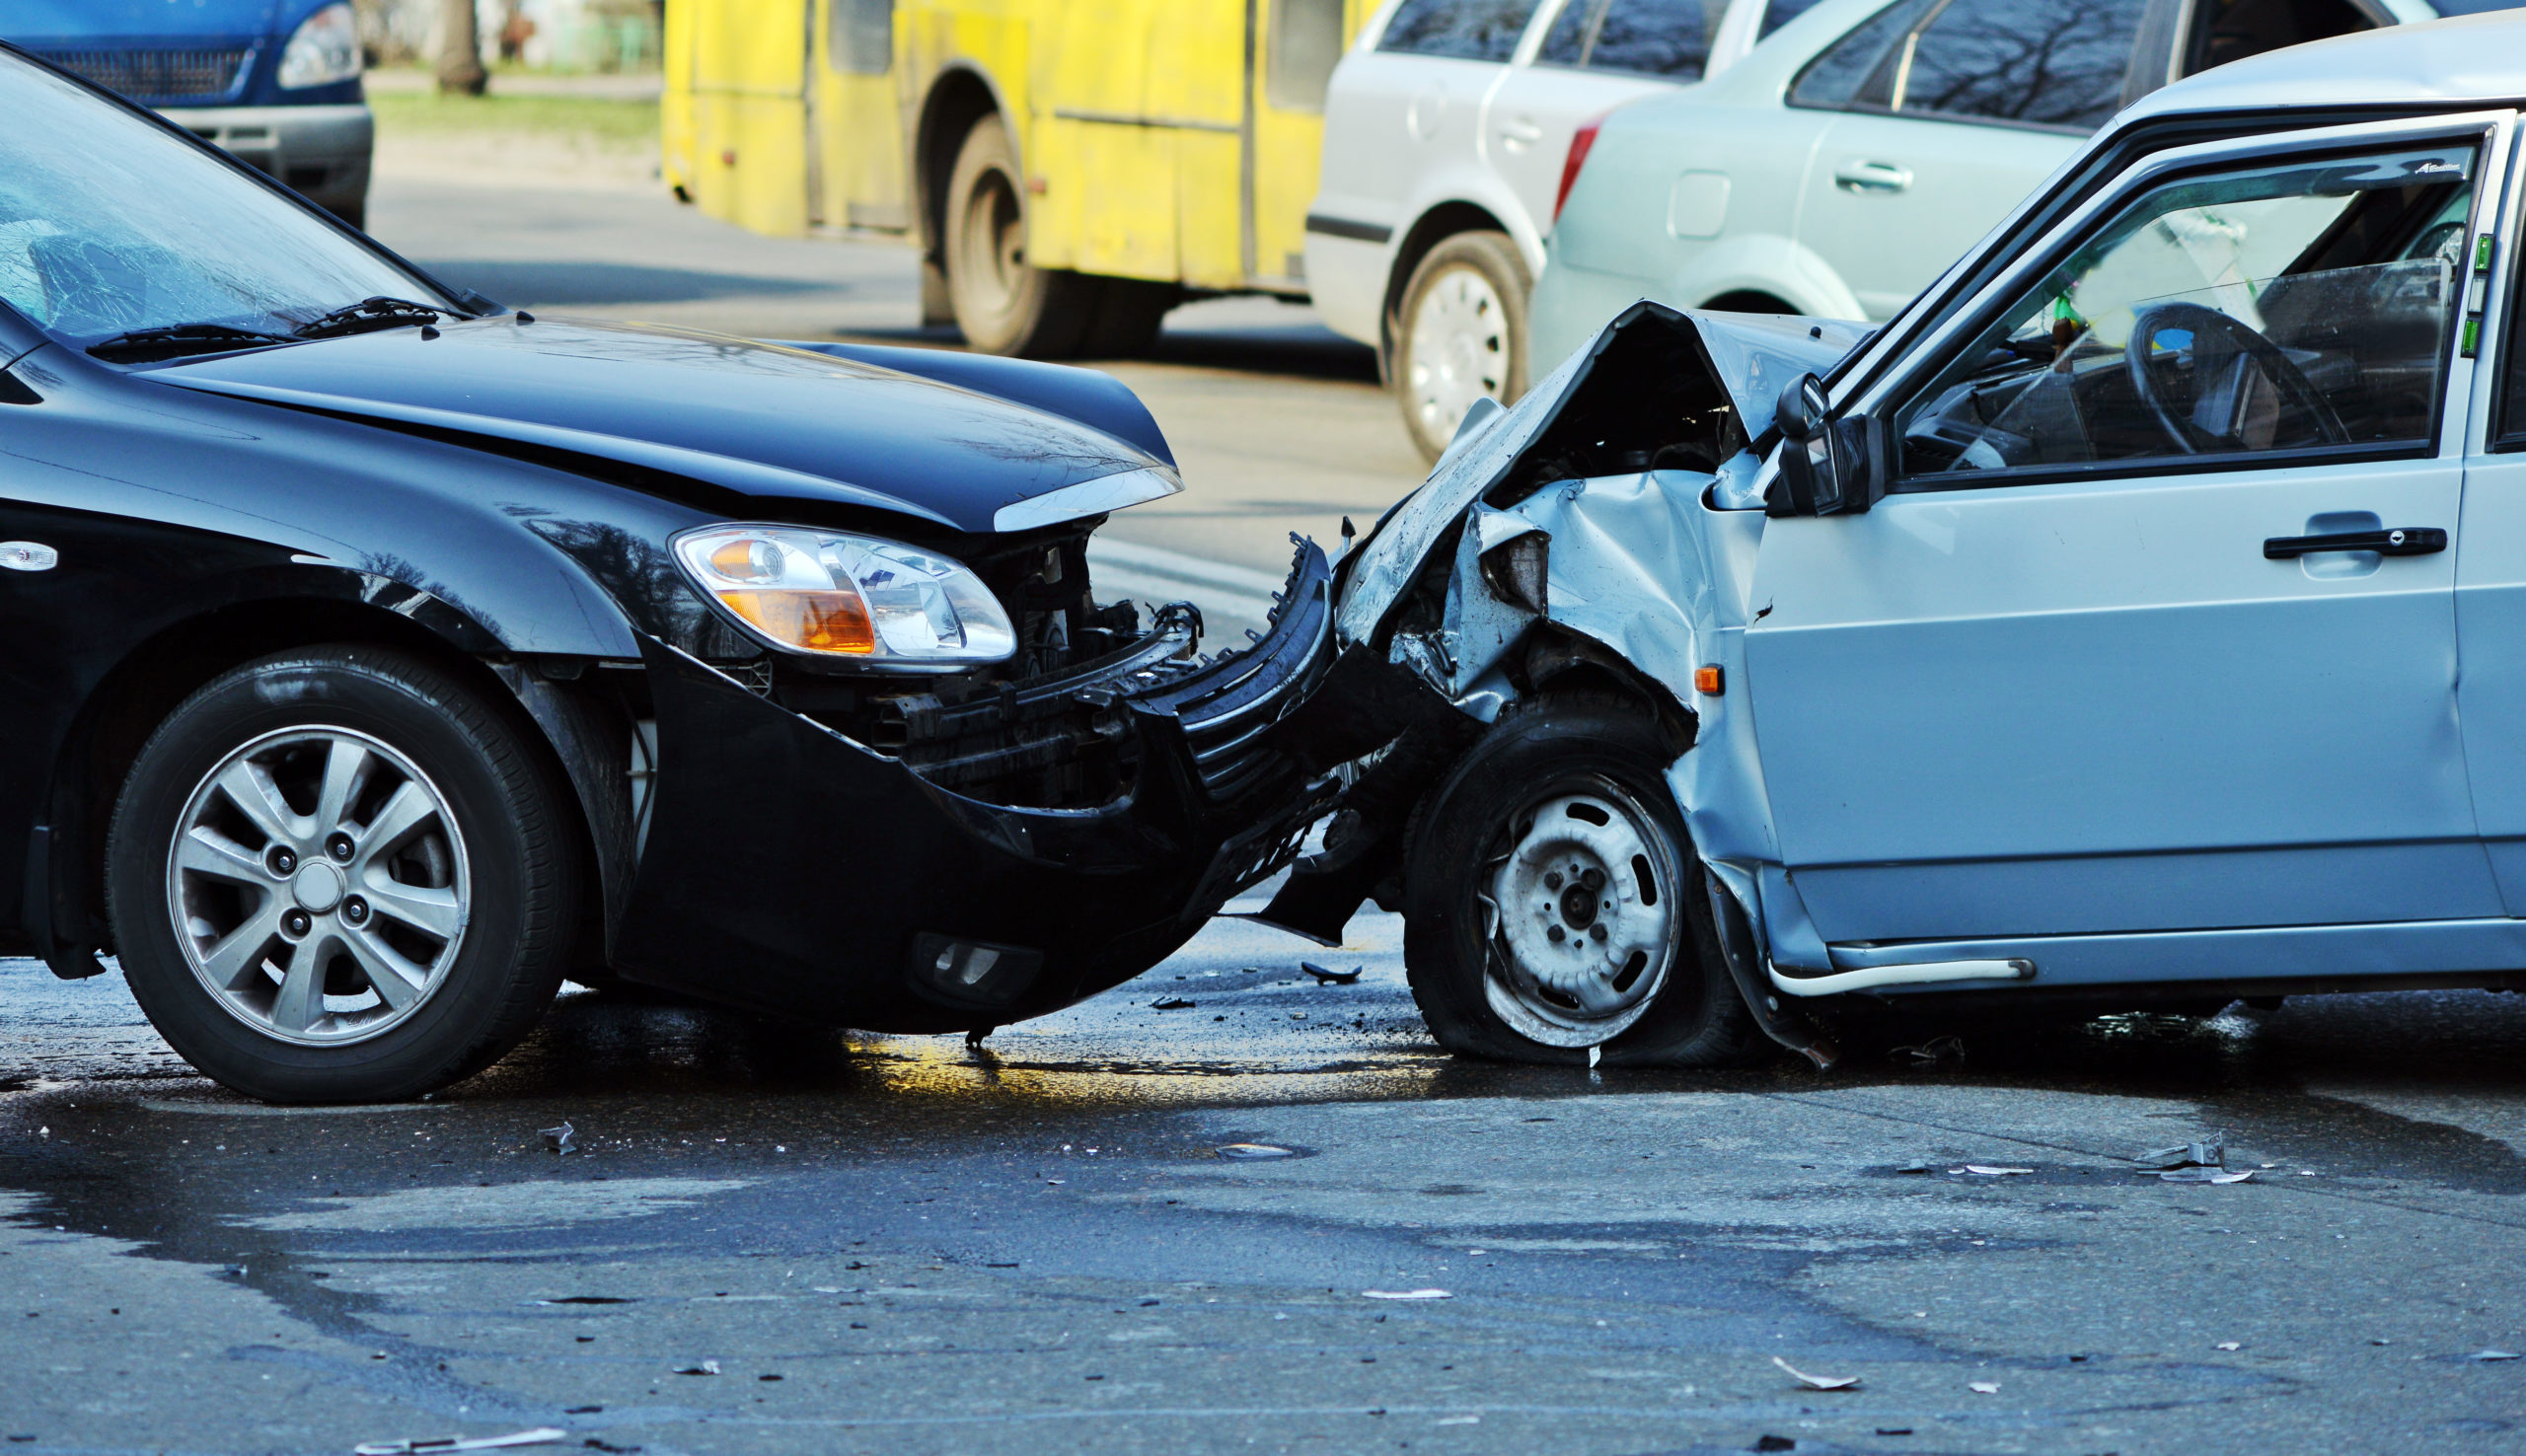 Do All Personal Injury Cases Require Physical Injury?